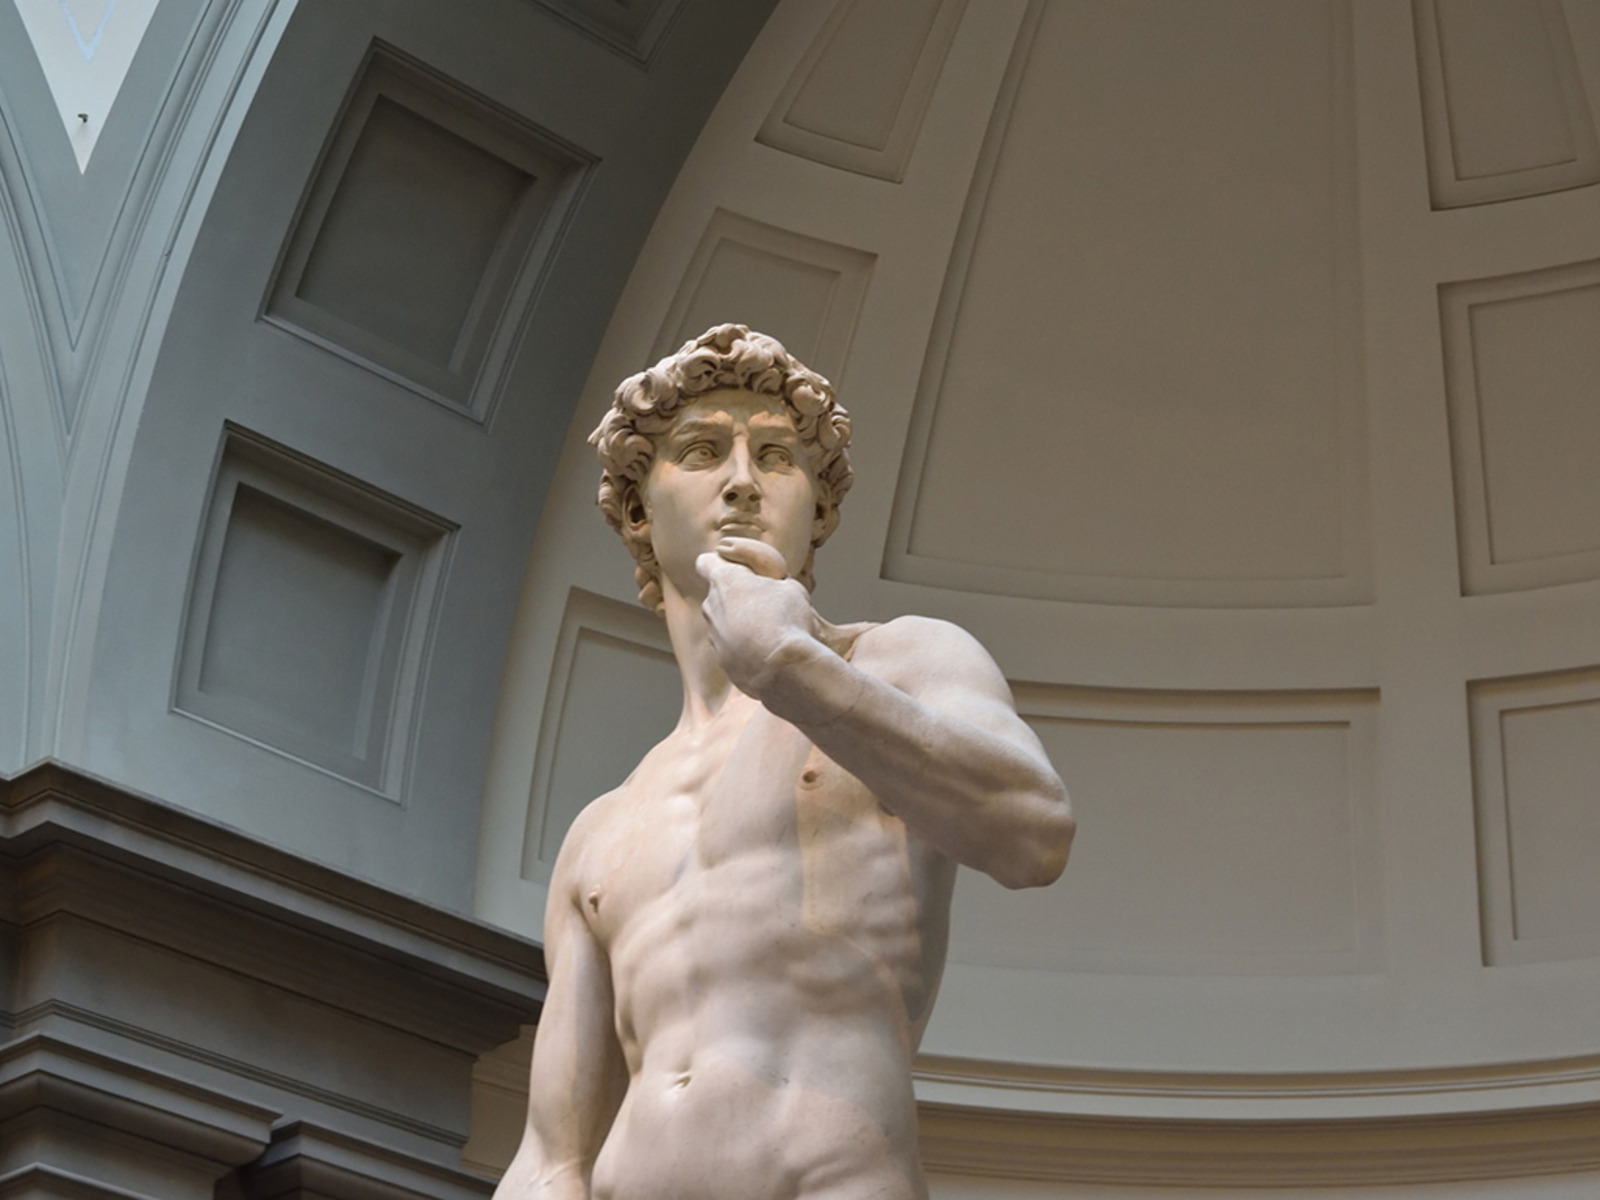 Who Created The David Sculpture